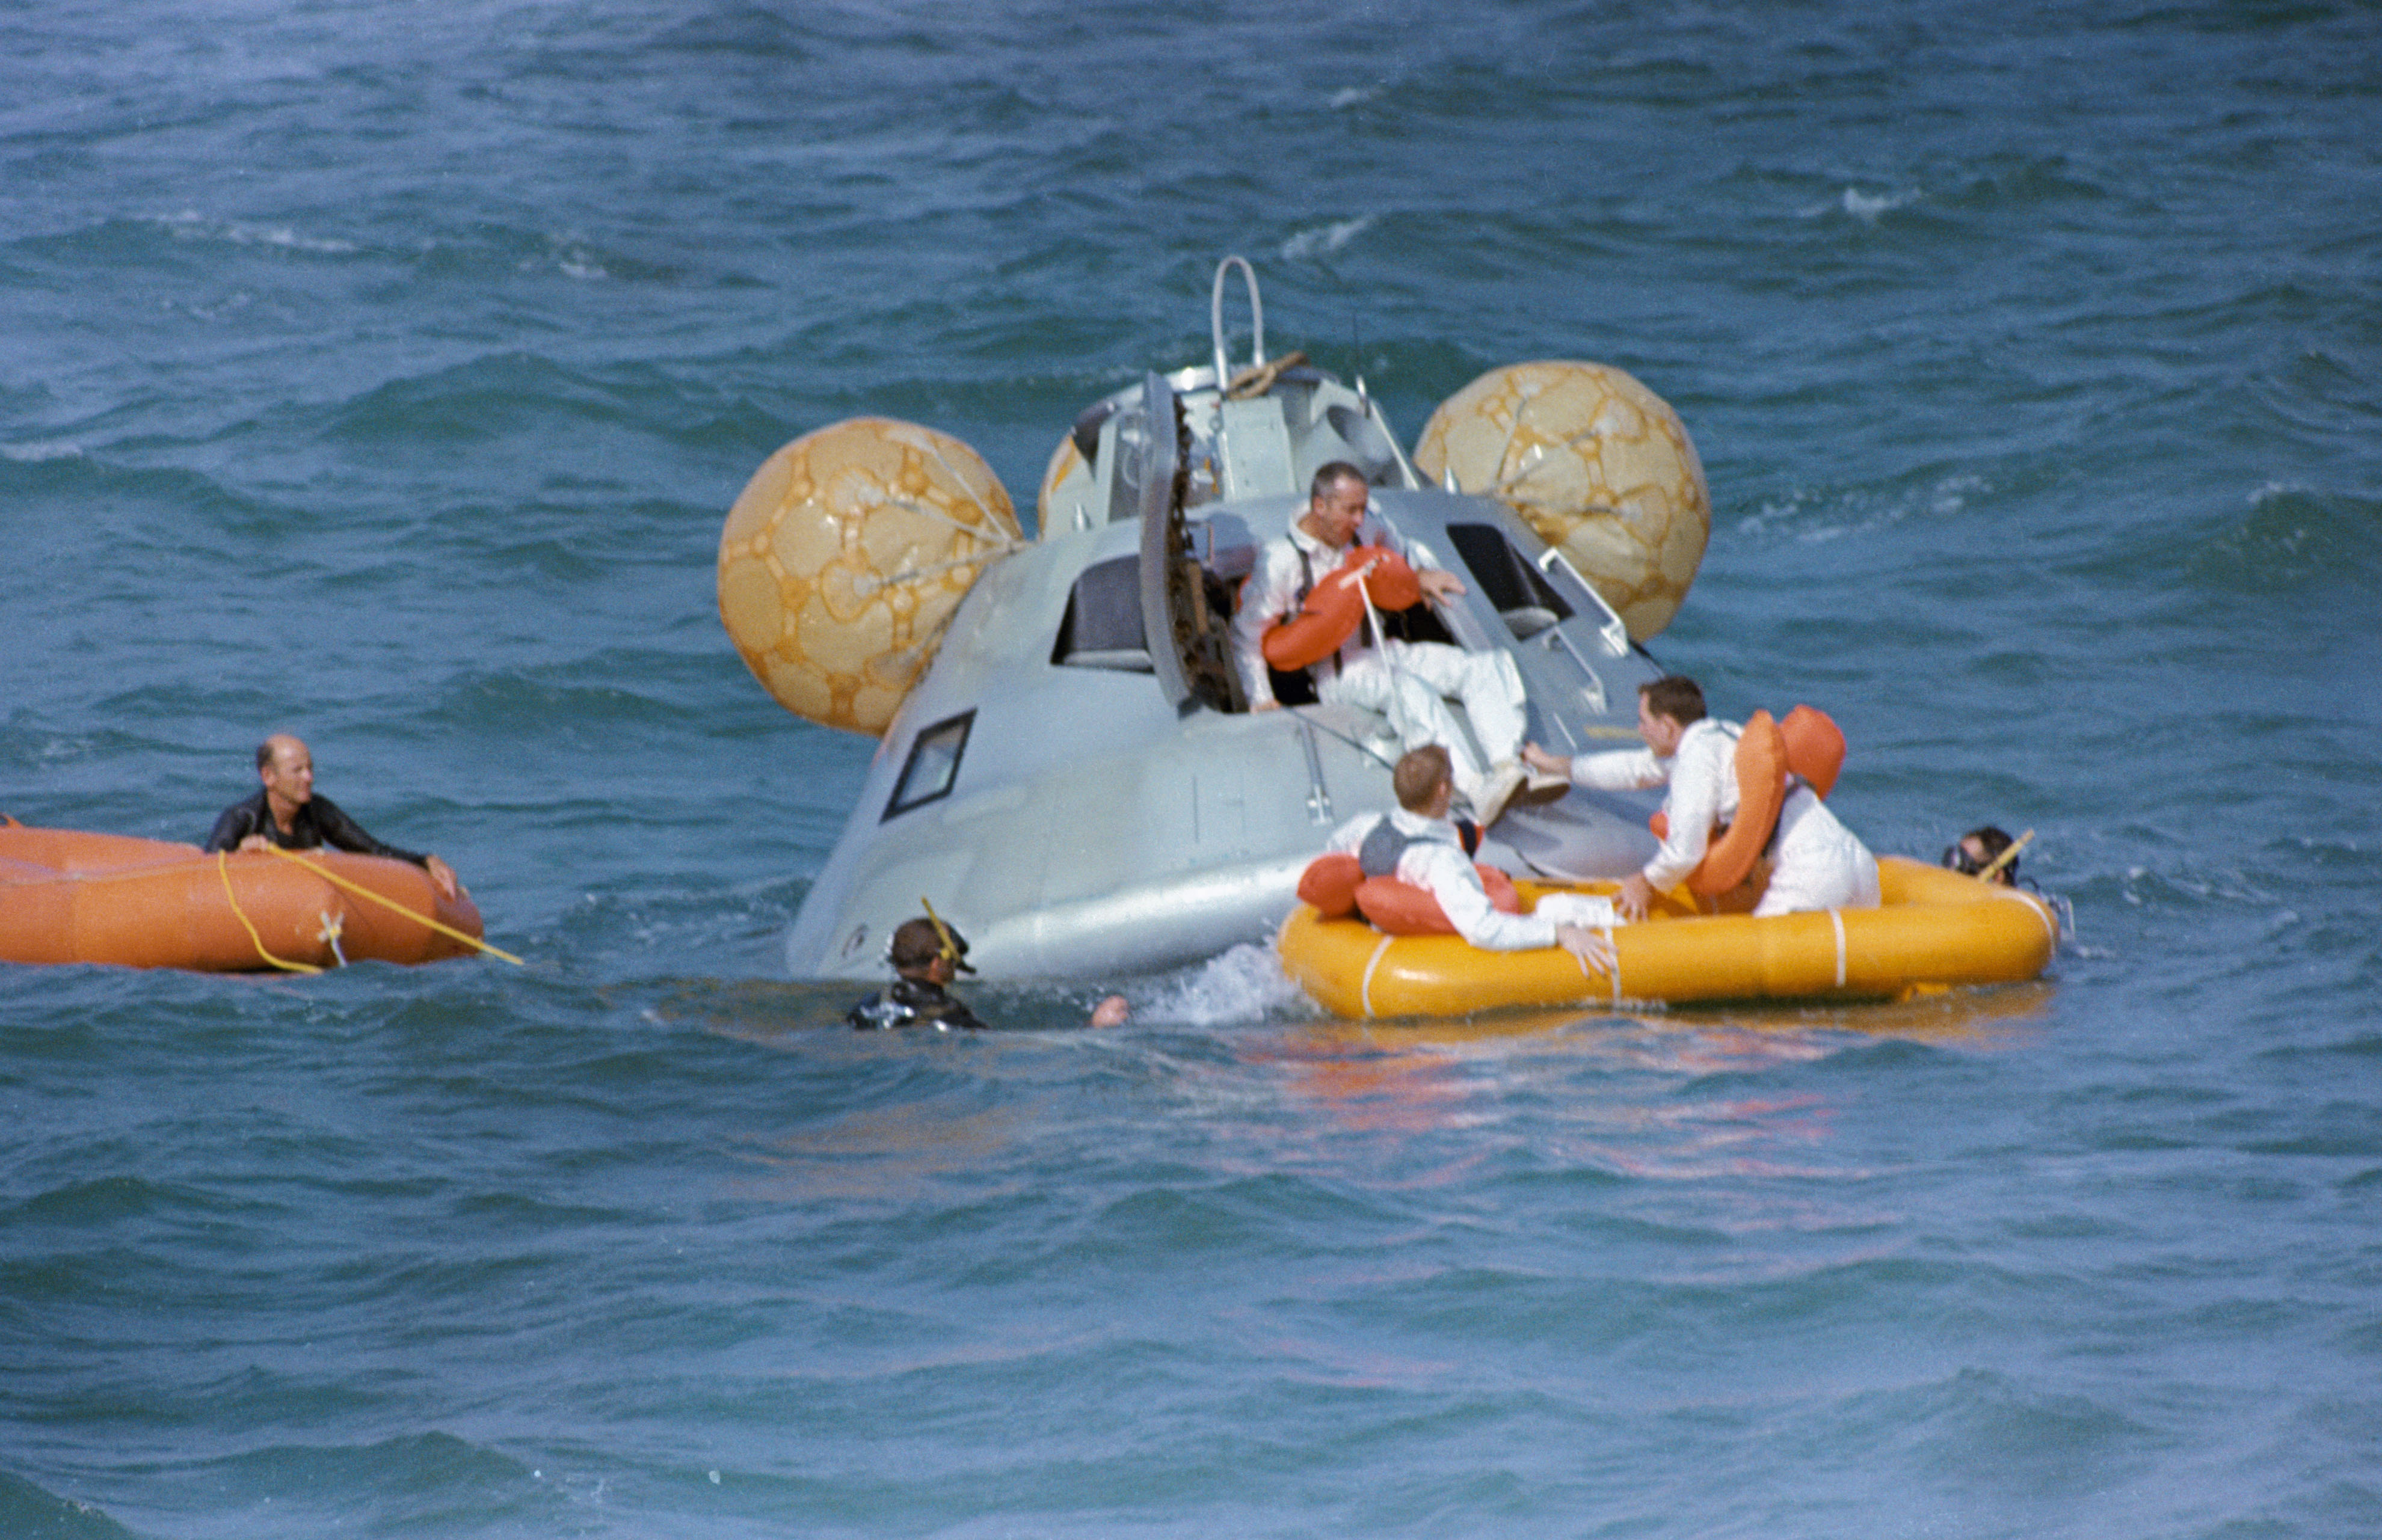 :  McDivitt (emerging from capsule), Schwieckart (left in raft), and Scott (right in raft) complete water egress training in the Gulf of Mexico